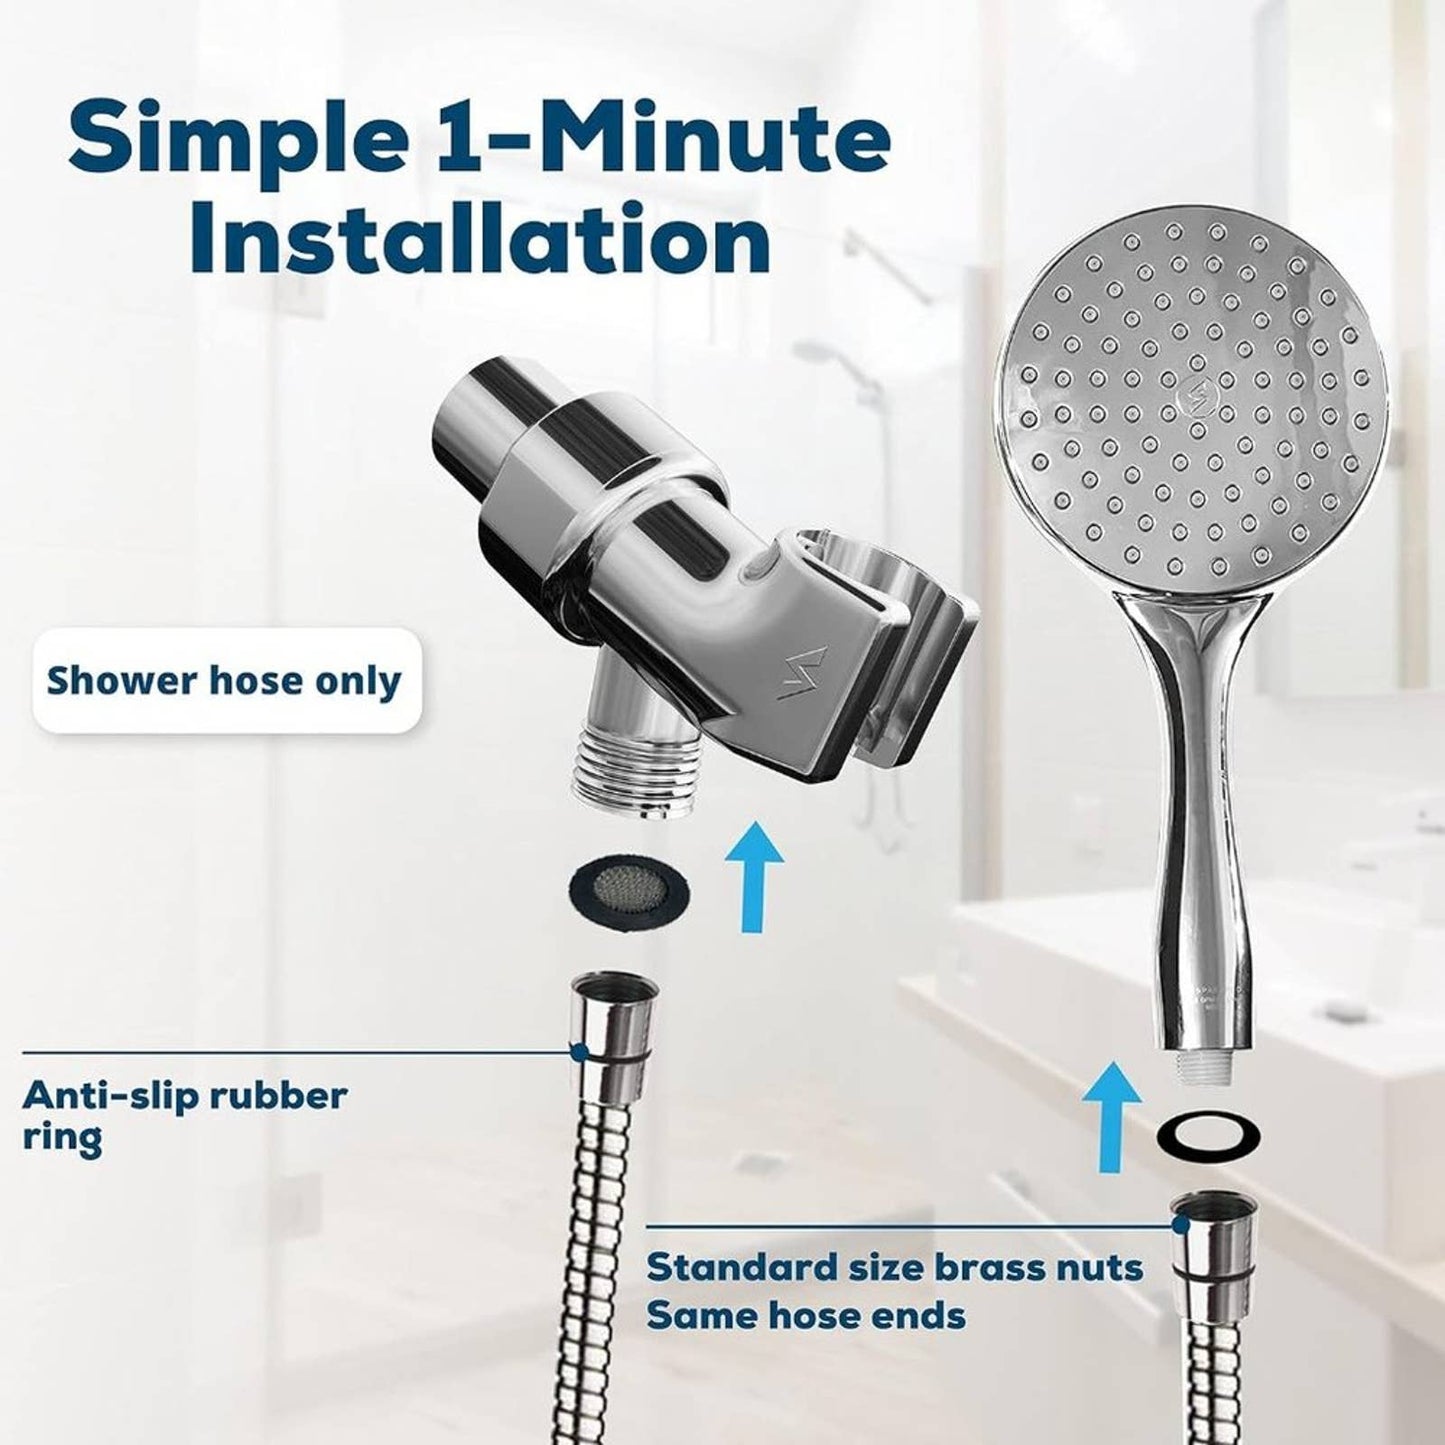 SparkPod Quick Install Shower Hose Replacement - 71 Inches Stainless Steel